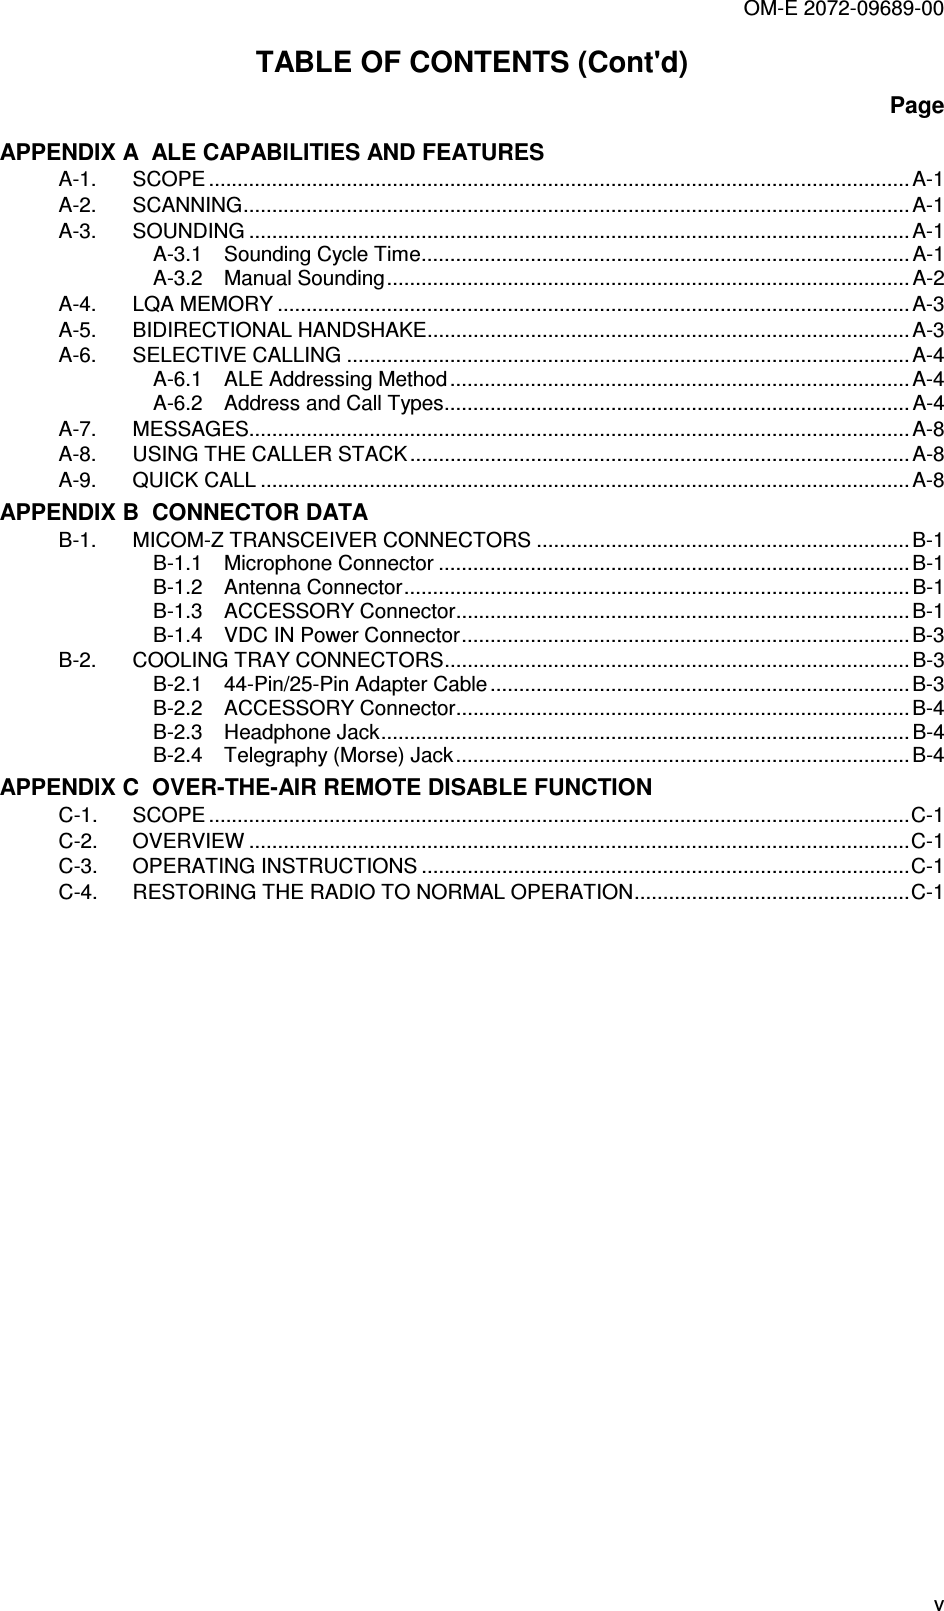 OM-E 2072-09689-00 v TABLE OF CONTENTS (Cont&apos;d) Page APPENDIX A  ALE CAPABILITIES AND FEATURES A-1. SCOPE .......................................................................................................................... A-1 A-2. SCANNING.................................................................................................................... A-1 A-3. SOUNDING ................................................................................................................... A-1 A-3.1 Sounding Cycle Time..................................................................................... A-1 A-3.2 Manual Sounding...........................................................................................A-2 A-4. LQA MEMORY ..............................................................................................................A-3 A-5. BIDIRECTIONAL HANDSHAKE....................................................................................A-3 A-6. SELECTIVE CALLING ..................................................................................................A-4 A-6.1 ALE Addressing Method................................................................................A-4 A-6.2 Address and Call Types.................................................................................A-4 A-7. MESSAGES................................................................................................................... A-8 A-8. USING THE CALLER STACK .......................................................................................A-8 A-9. QUICK CALL .................................................................................................................A-8 APPENDIX B  CONNECTOR DATA B-1. MICOM-Z TRANSCEIVER CONNECTORS .................................................................B-1 B-1.1 Microphone Connector ..................................................................................B-1 B-1.2 Antenna Connector........................................................................................B-1 B-1.3 ACCESSORY Connector...............................................................................B-1 B-1.4 VDC IN Power Connector..............................................................................B-3 B-2. COOLING TRAY CONNECTORS.................................................................................B-3 B-2.1 44-Pin/25-Pin Adapter Cable.........................................................................B-3 B-2.2 ACCESSORY Connector...............................................................................B-4 B-2.3 Headphone Jack............................................................................................B-4 B-2.4 Telegraphy (Morse) Jack............................................................................... B-4 APPENDIX C  OVER-THE-AIR REMOTE DISABLE FUNCTION C-1. SCOPE ..........................................................................................................................C-1 C-2. OVERVIEW ...................................................................................................................C-1 C-3. OPERATING INSTRUCTIONS .....................................................................................C-1 C-4. RESTORING THE RADIO TO NORMAL OPERATION................................................C-1  